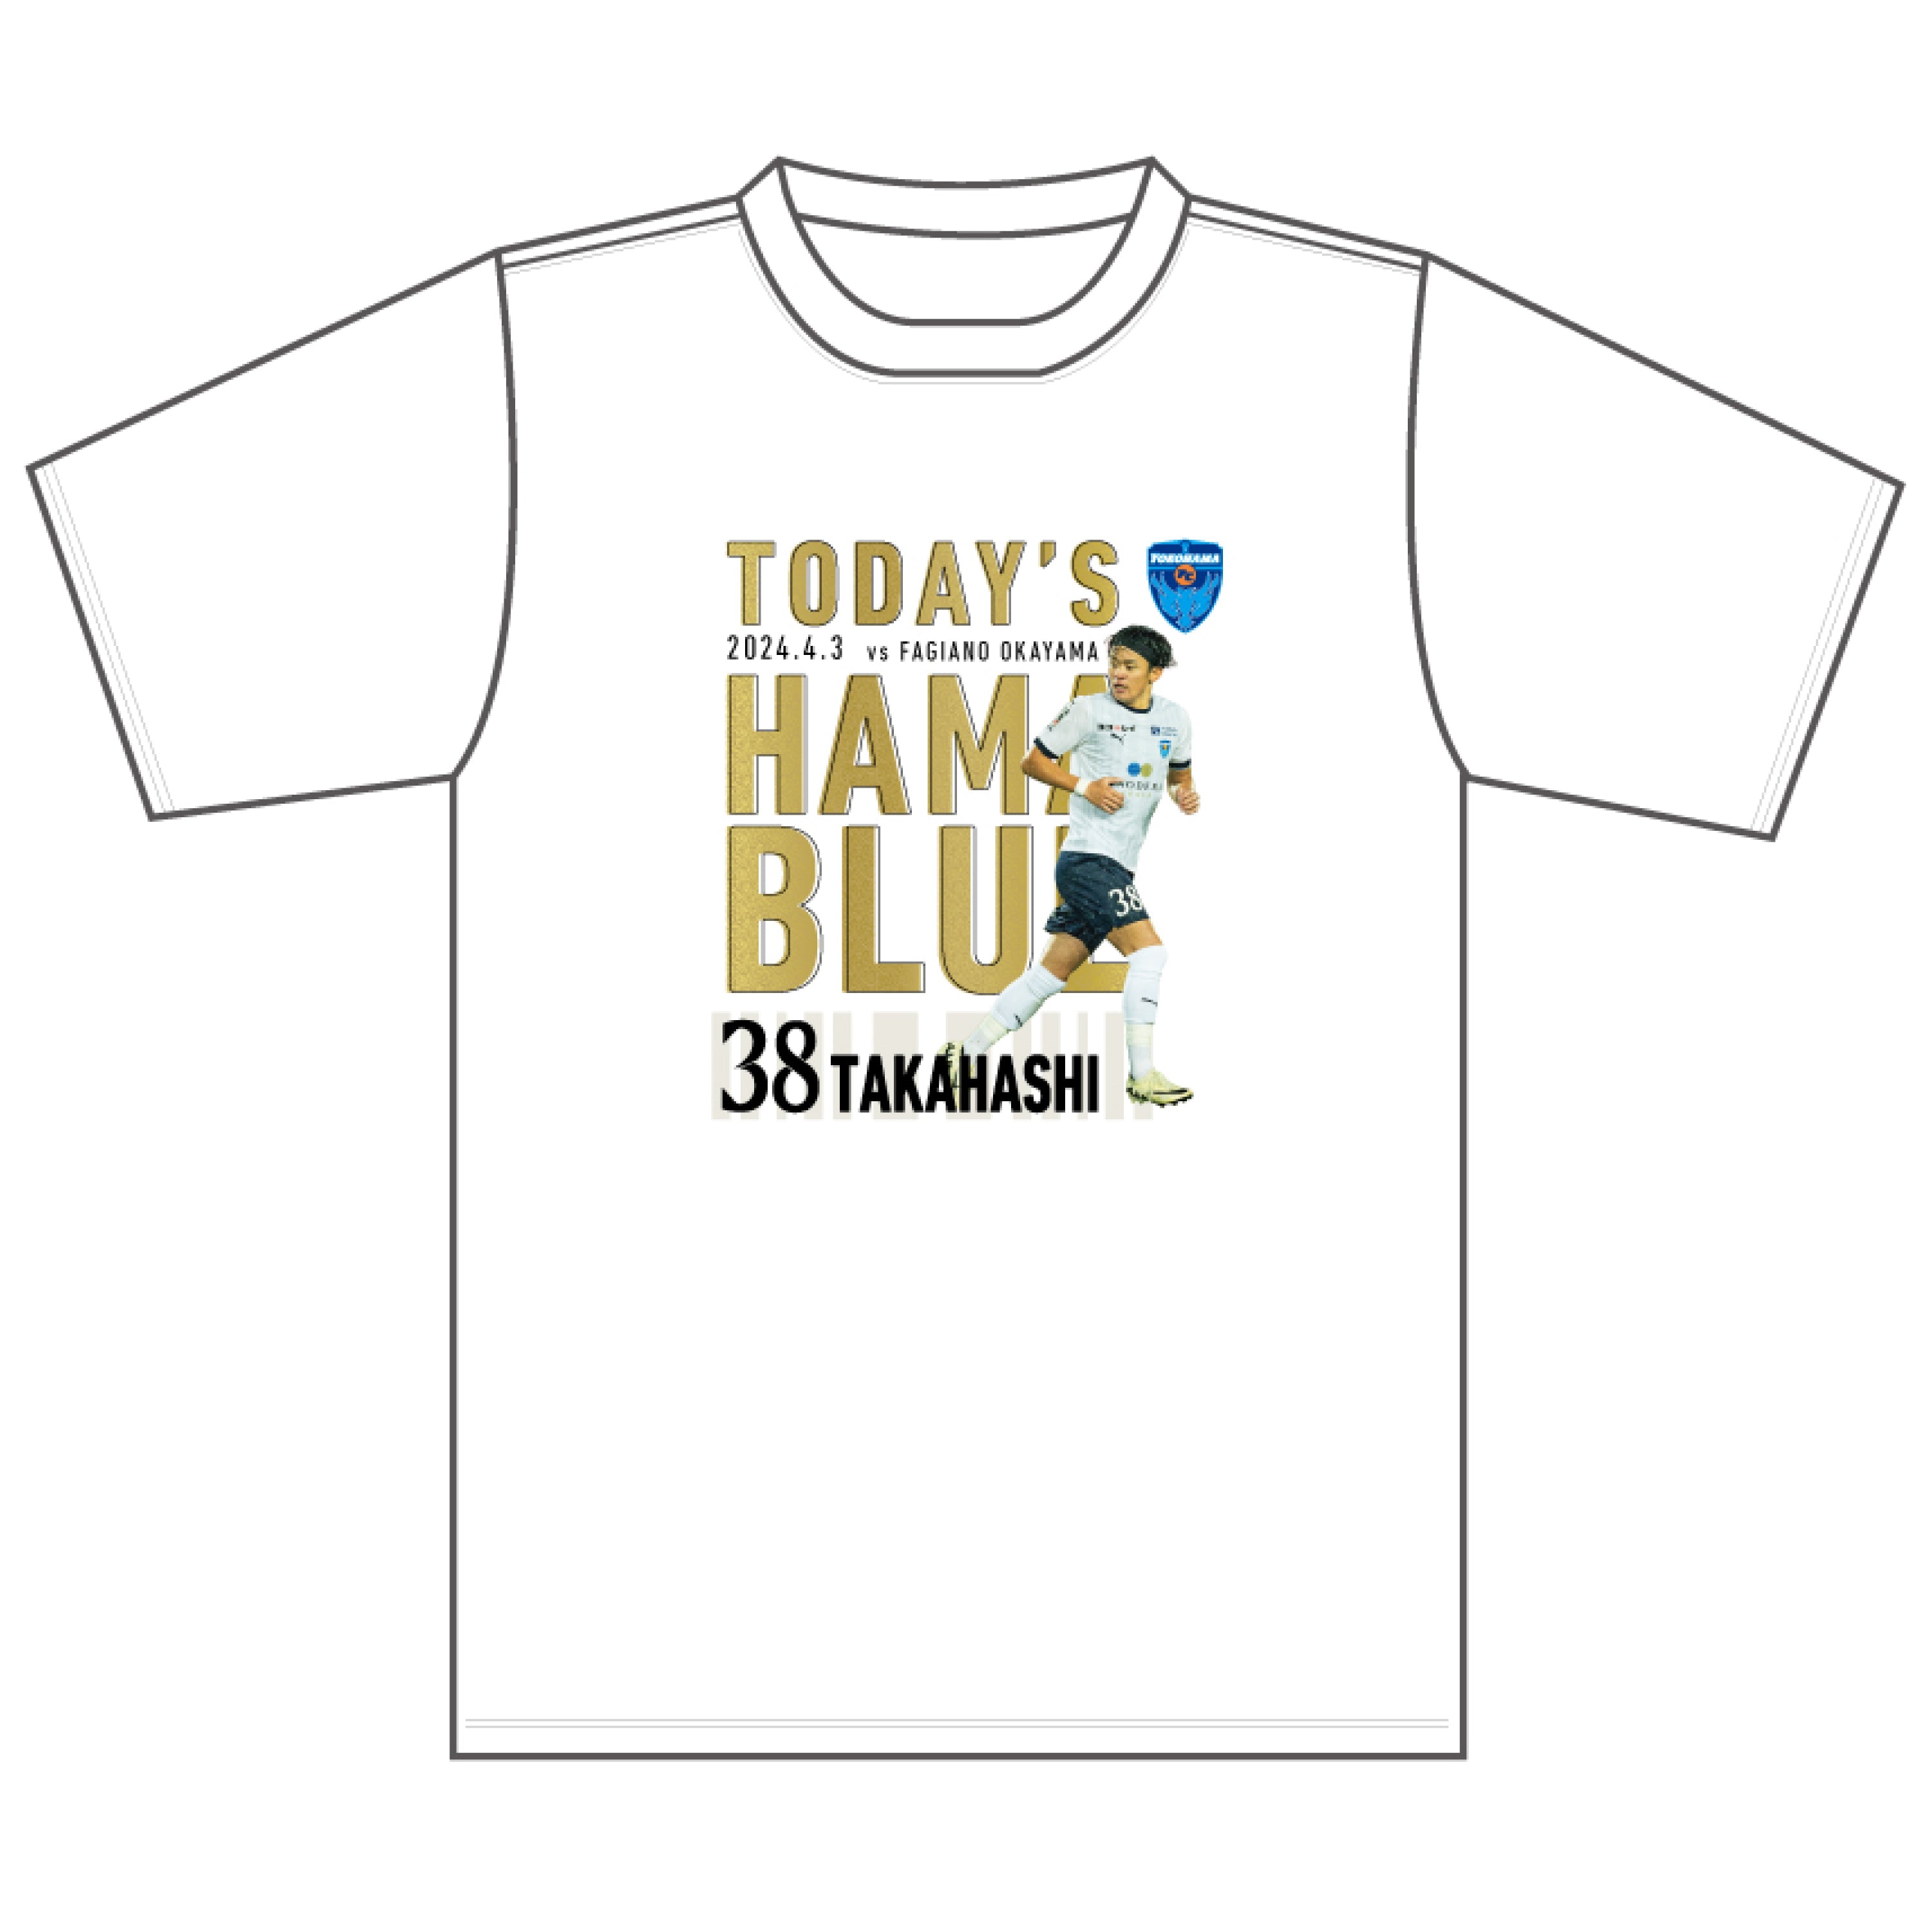 【Tシャツ】4/3ファジアーノ岡山戦TODAY'S HAMABLUE